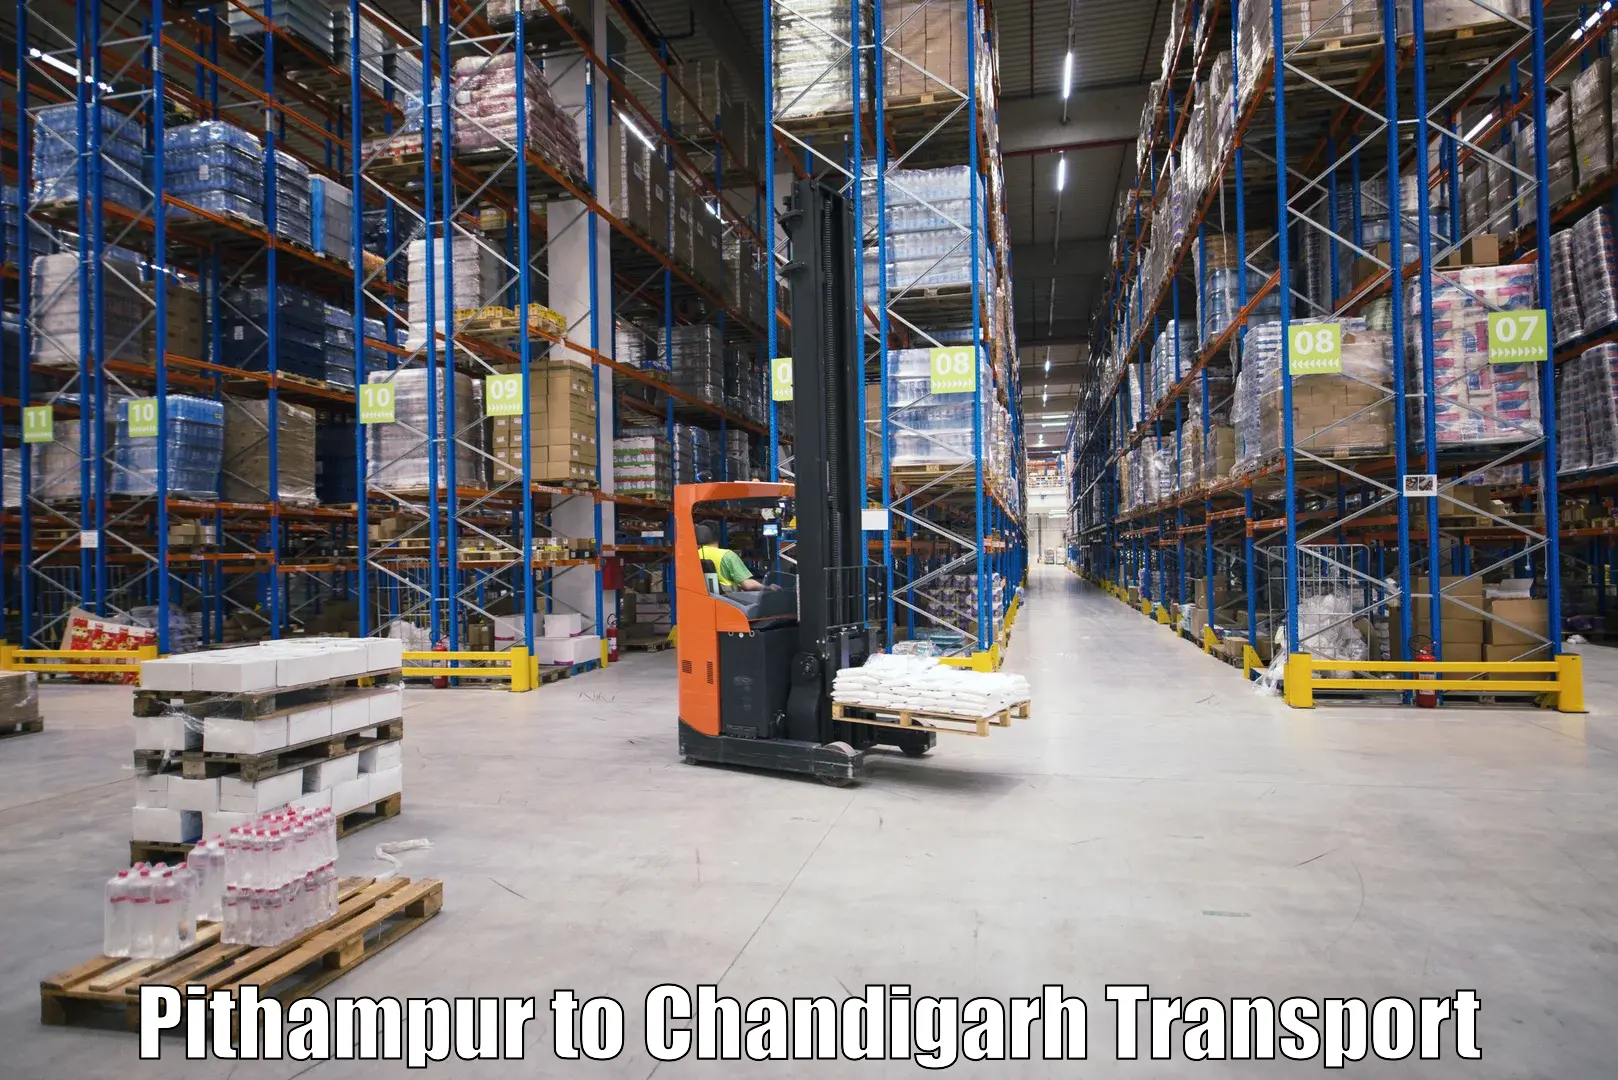 Vehicle parcel service Pithampur to Chandigarh